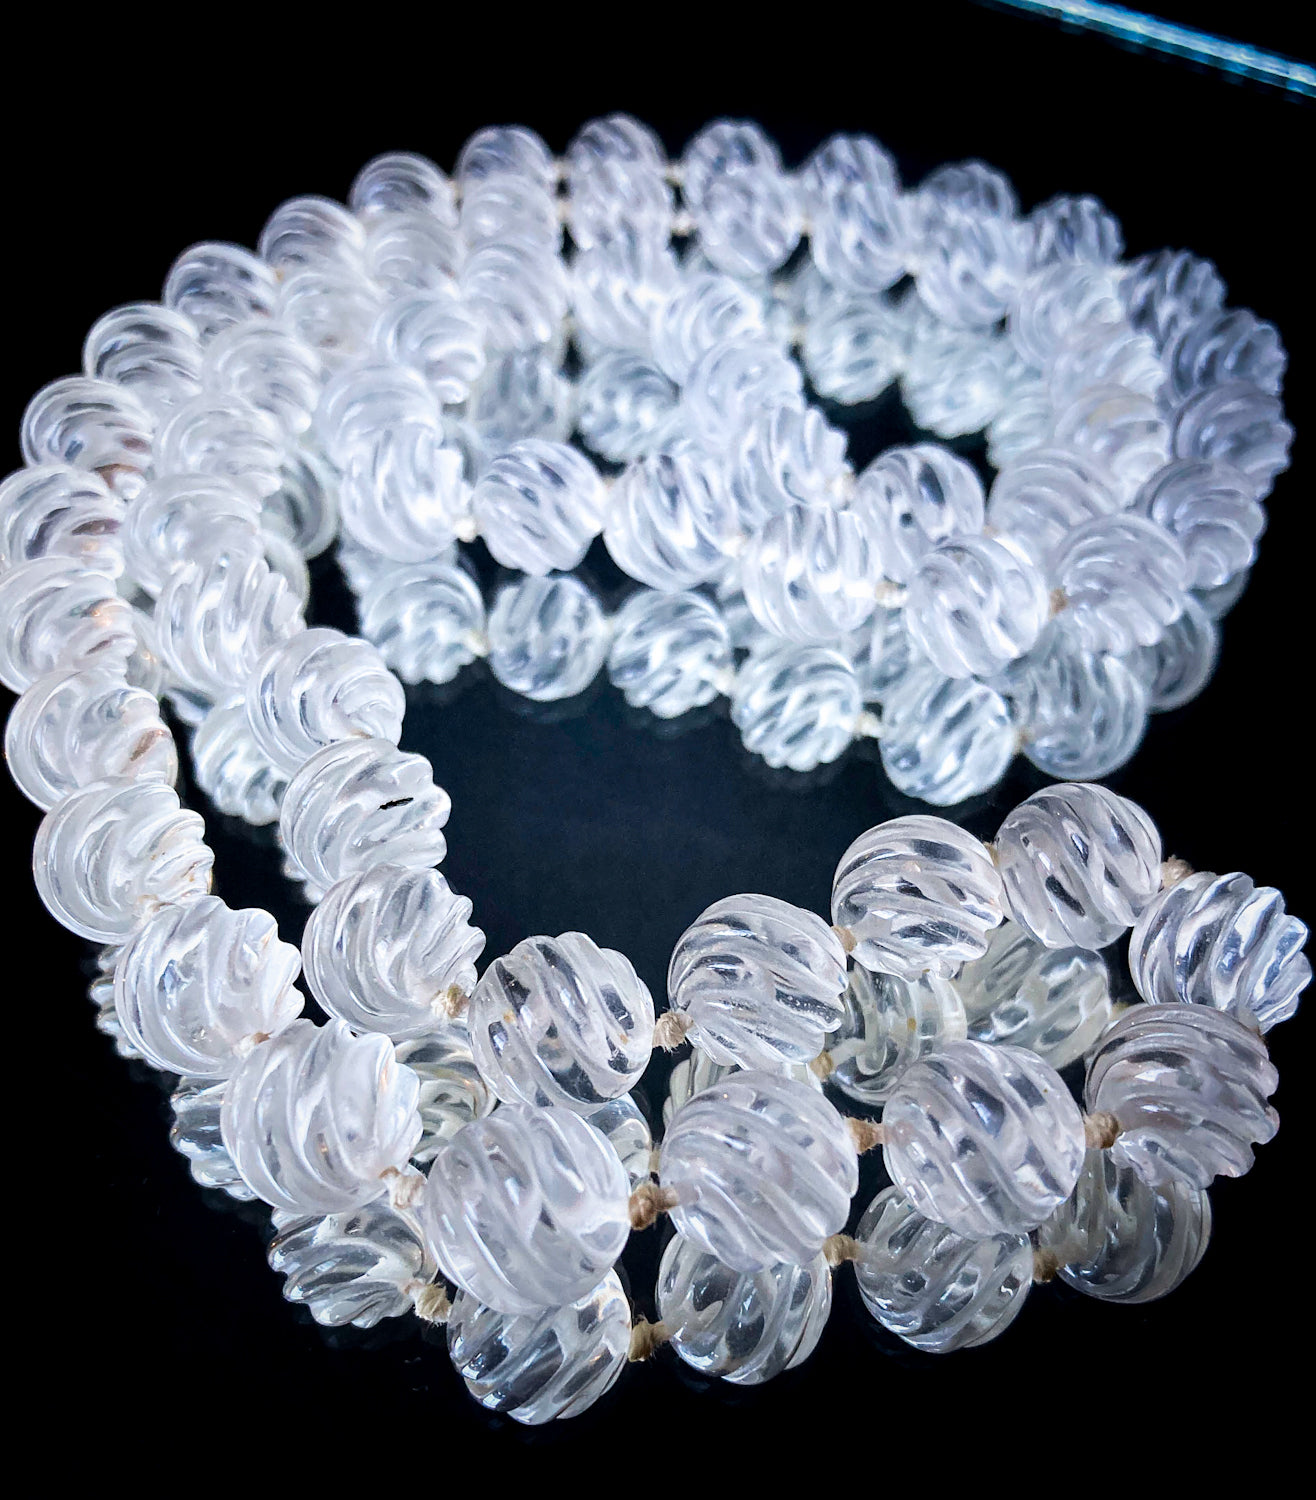 Spiral Carved Rock Crystal Hand Knotted 32" Long Beaded Rope Necklace